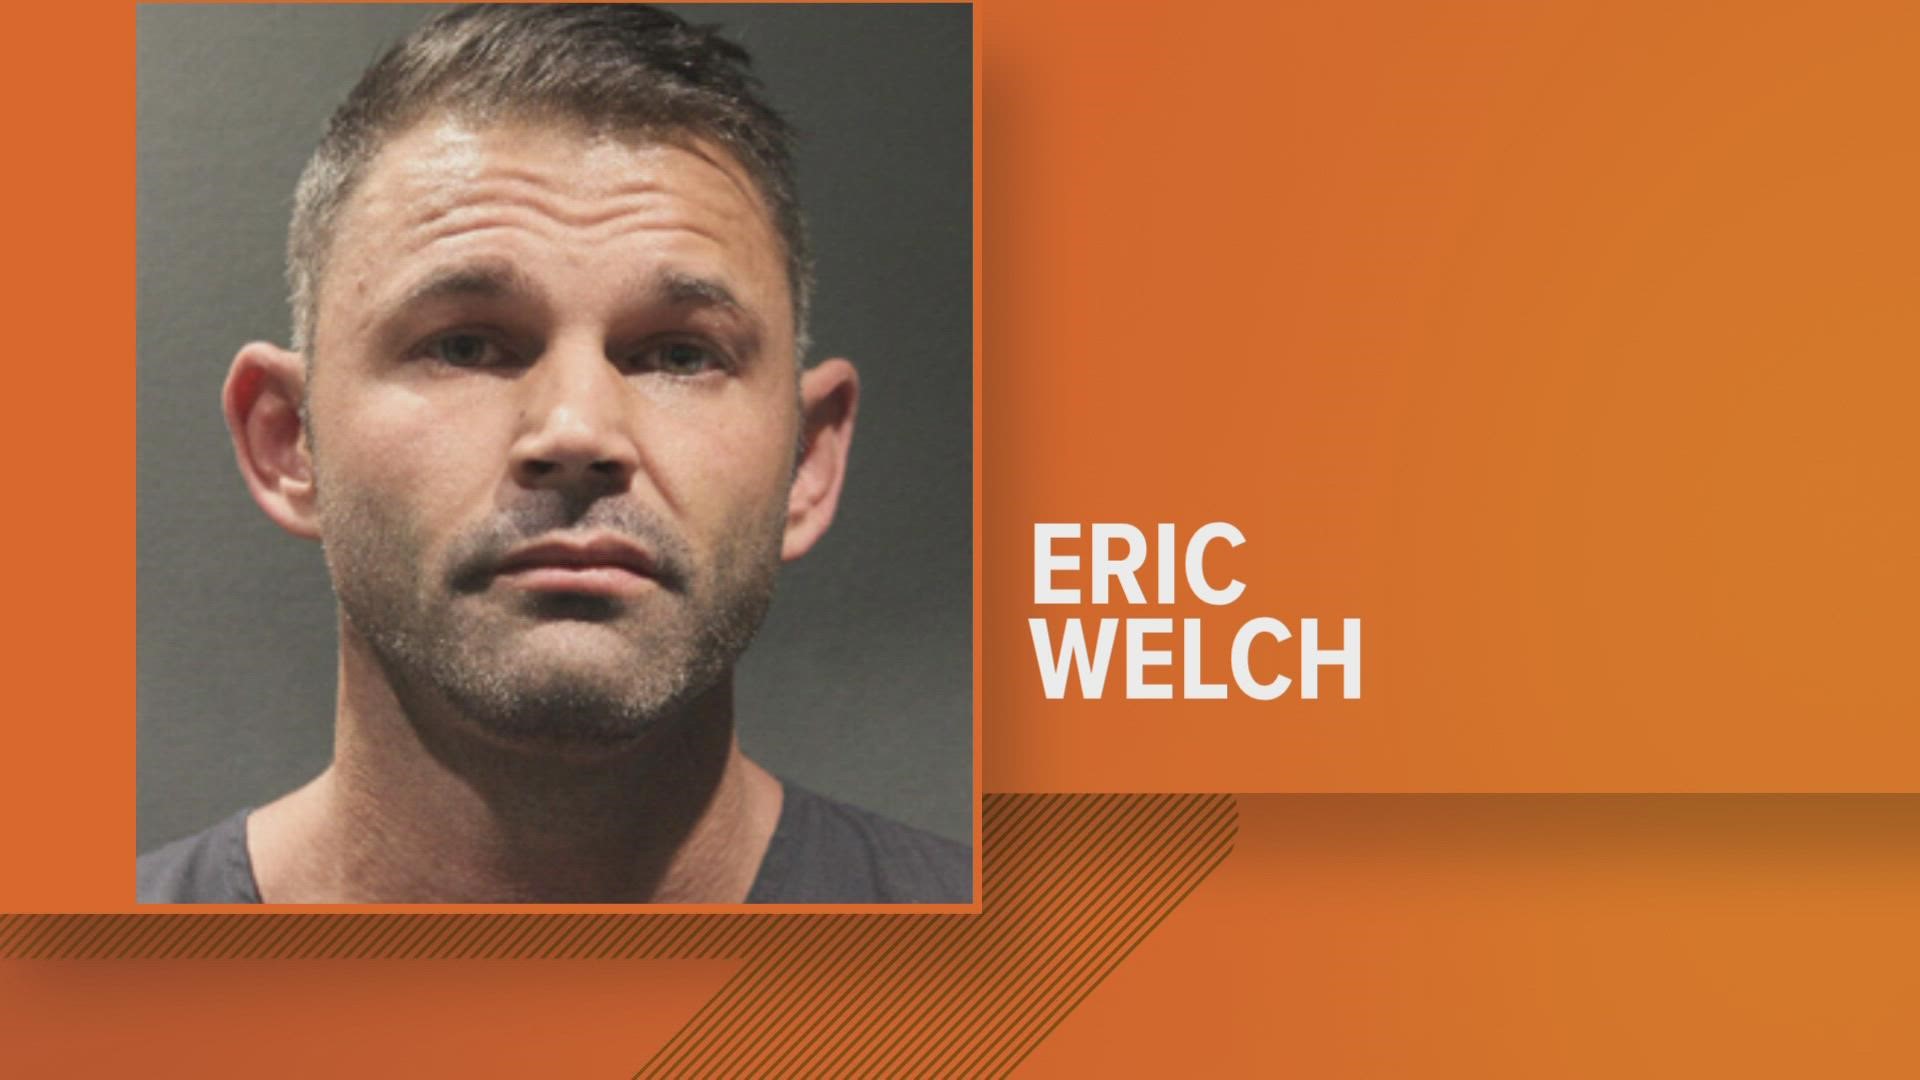 Eric Welch is due in court Tuesday.